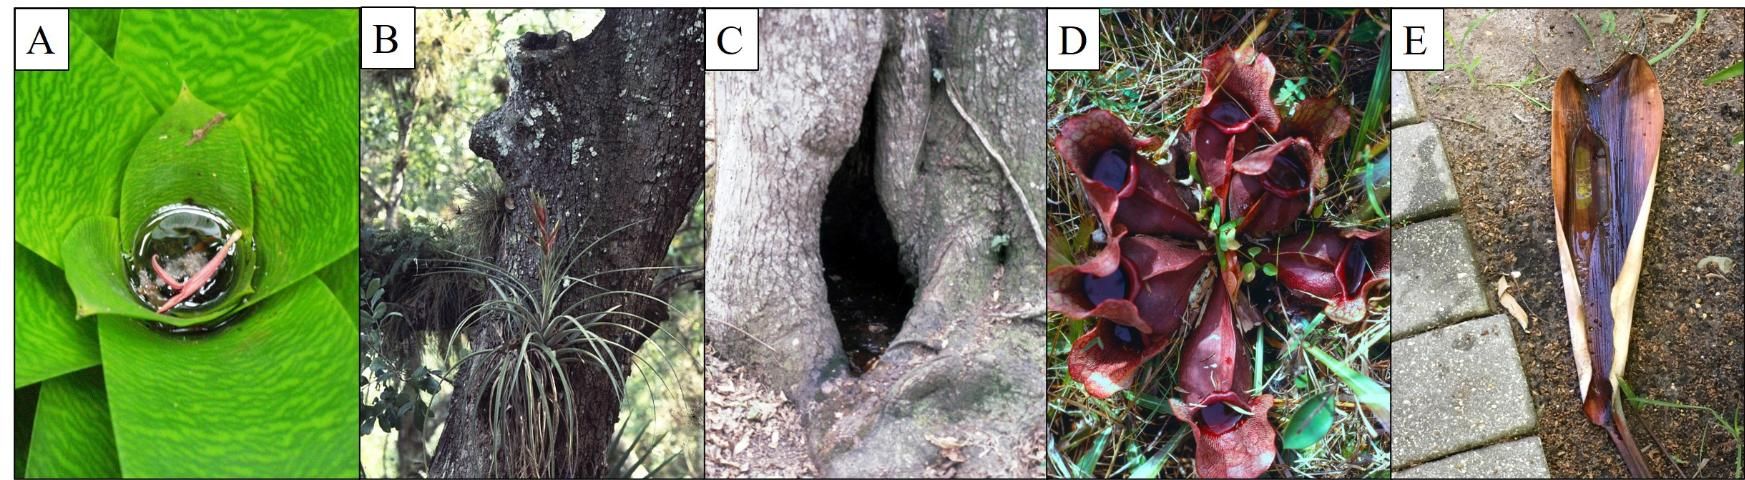 Figure 1. Examples of phytotelmata, small water bodies held by parts of terrestrial plants, often occupied by immature mosquitoes. A. Central tank of exotic bromeliad; B. Epiphytic bromeliad air plant; C. Treehole; D. Purple pitcher plant leaf; E. Palm spathe.